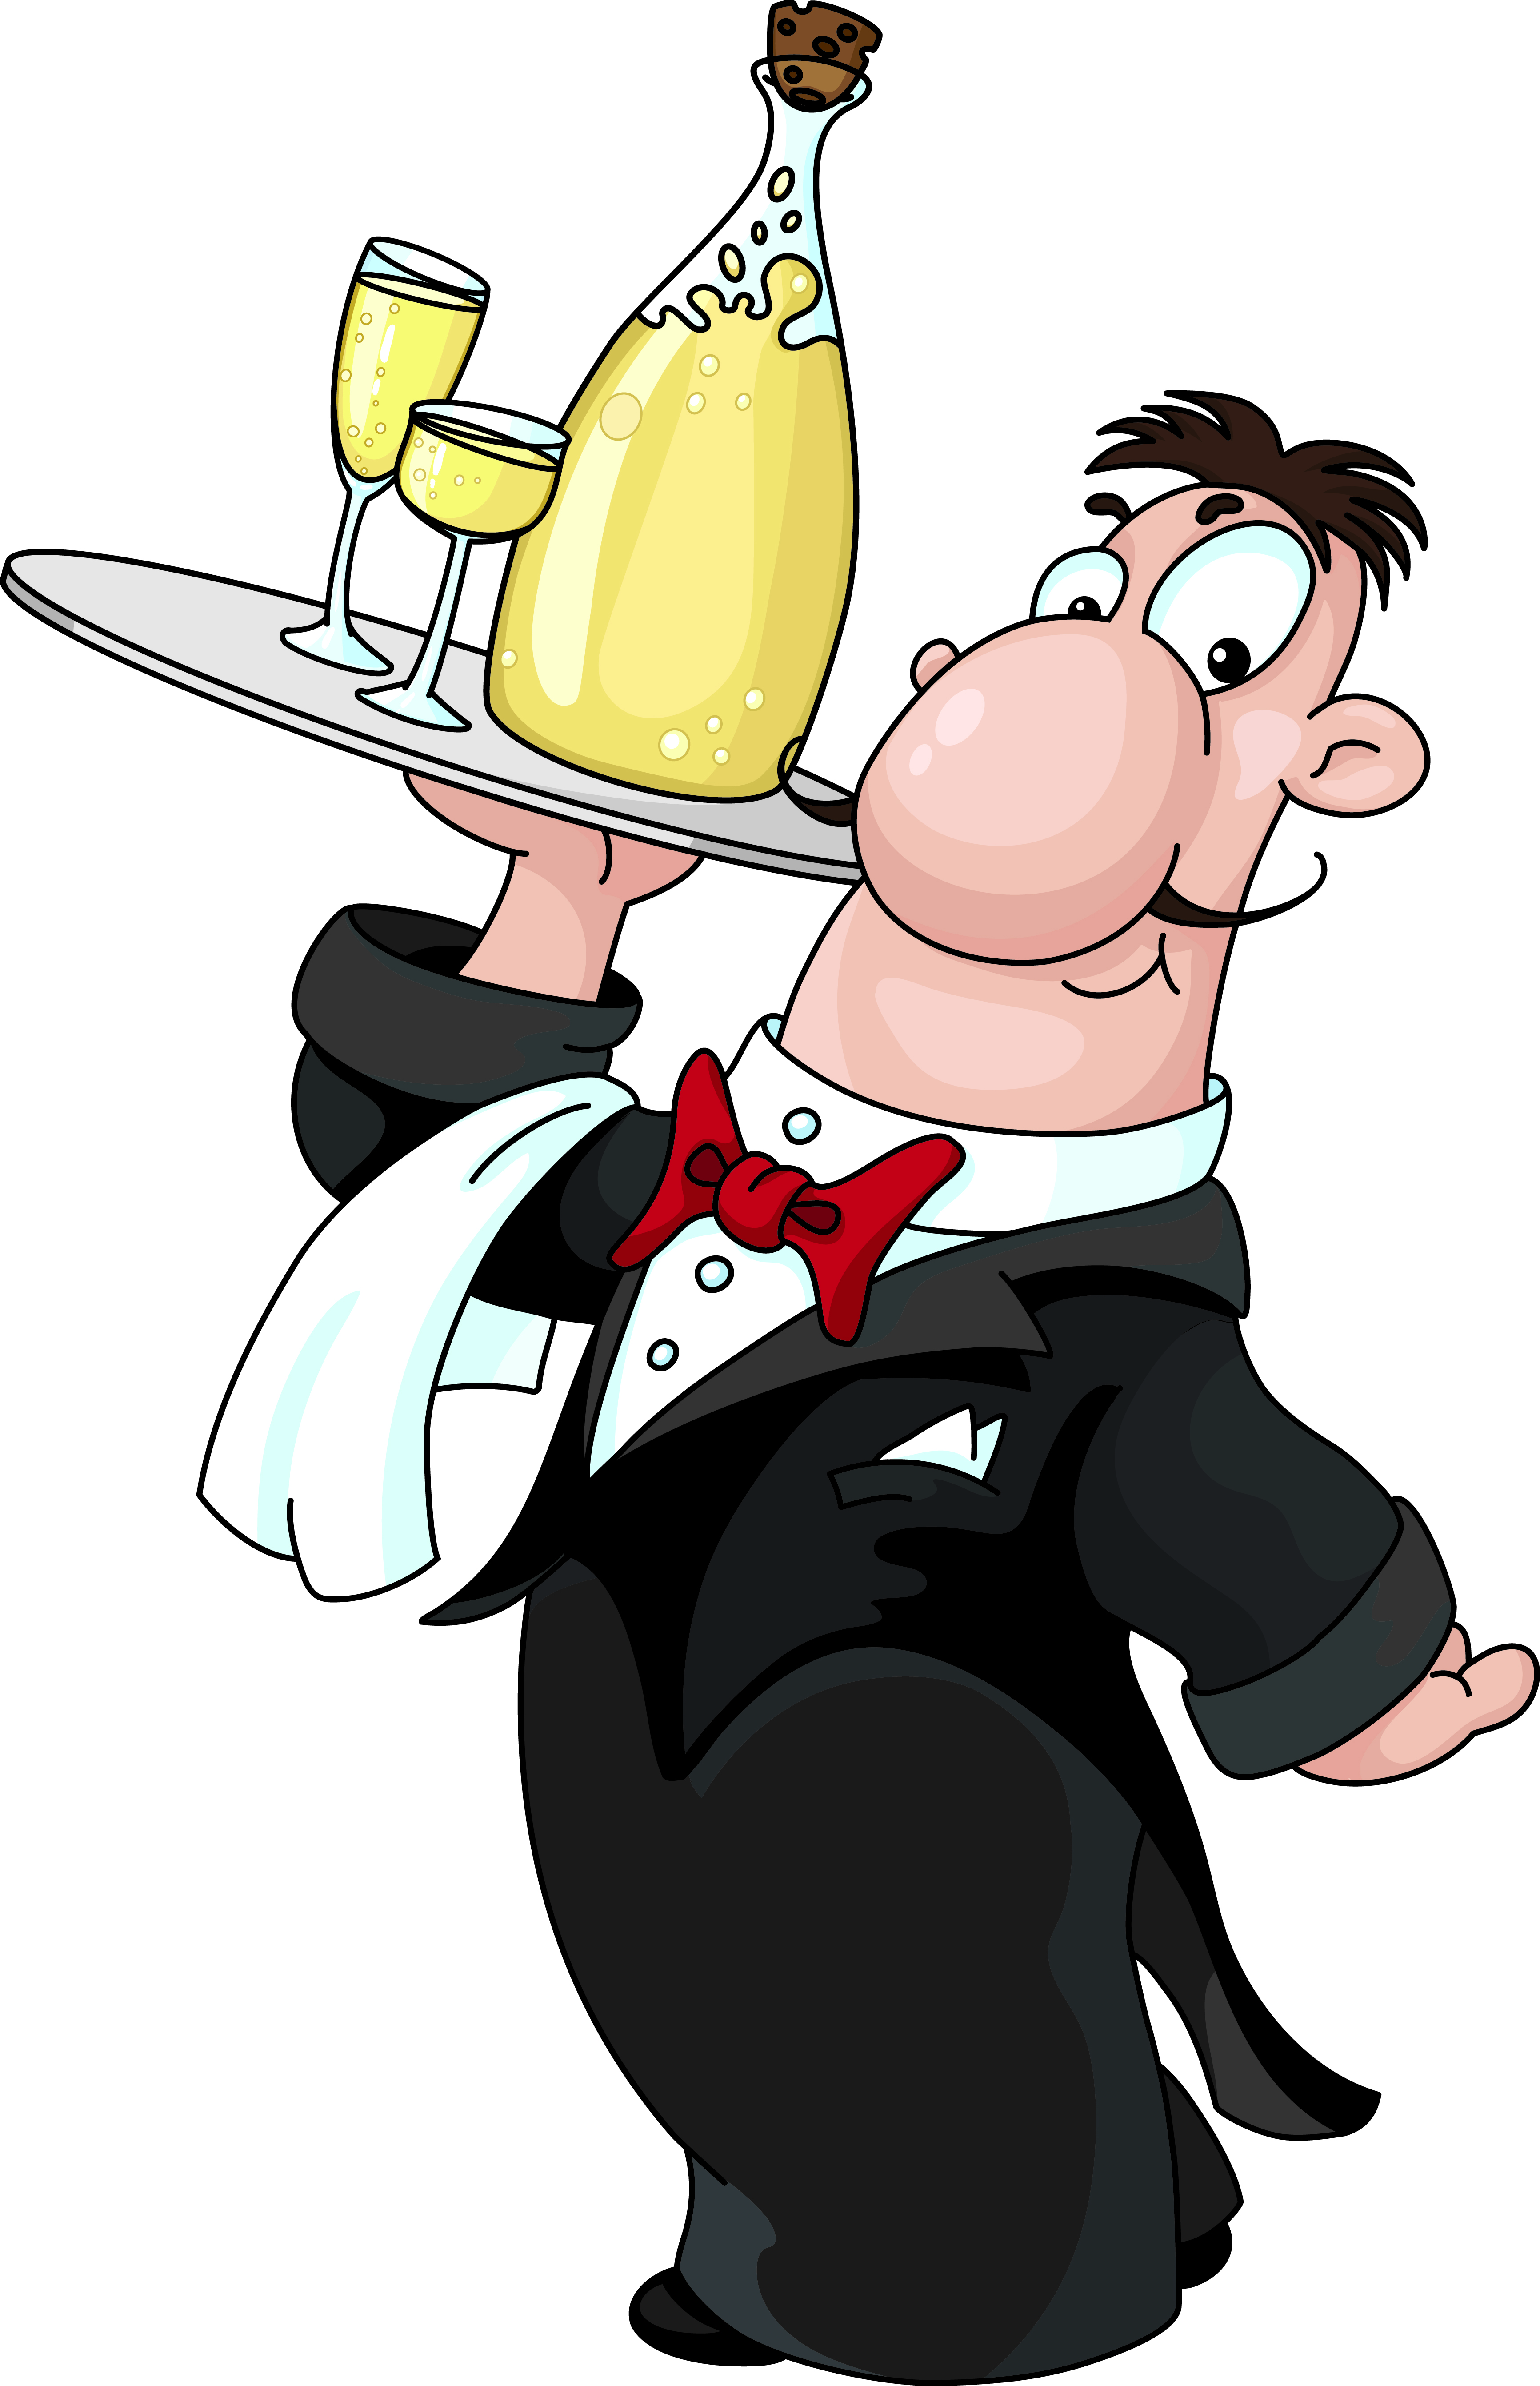 Cartoon image of chefs and waiters 04 vector Free Vector / 4Vector